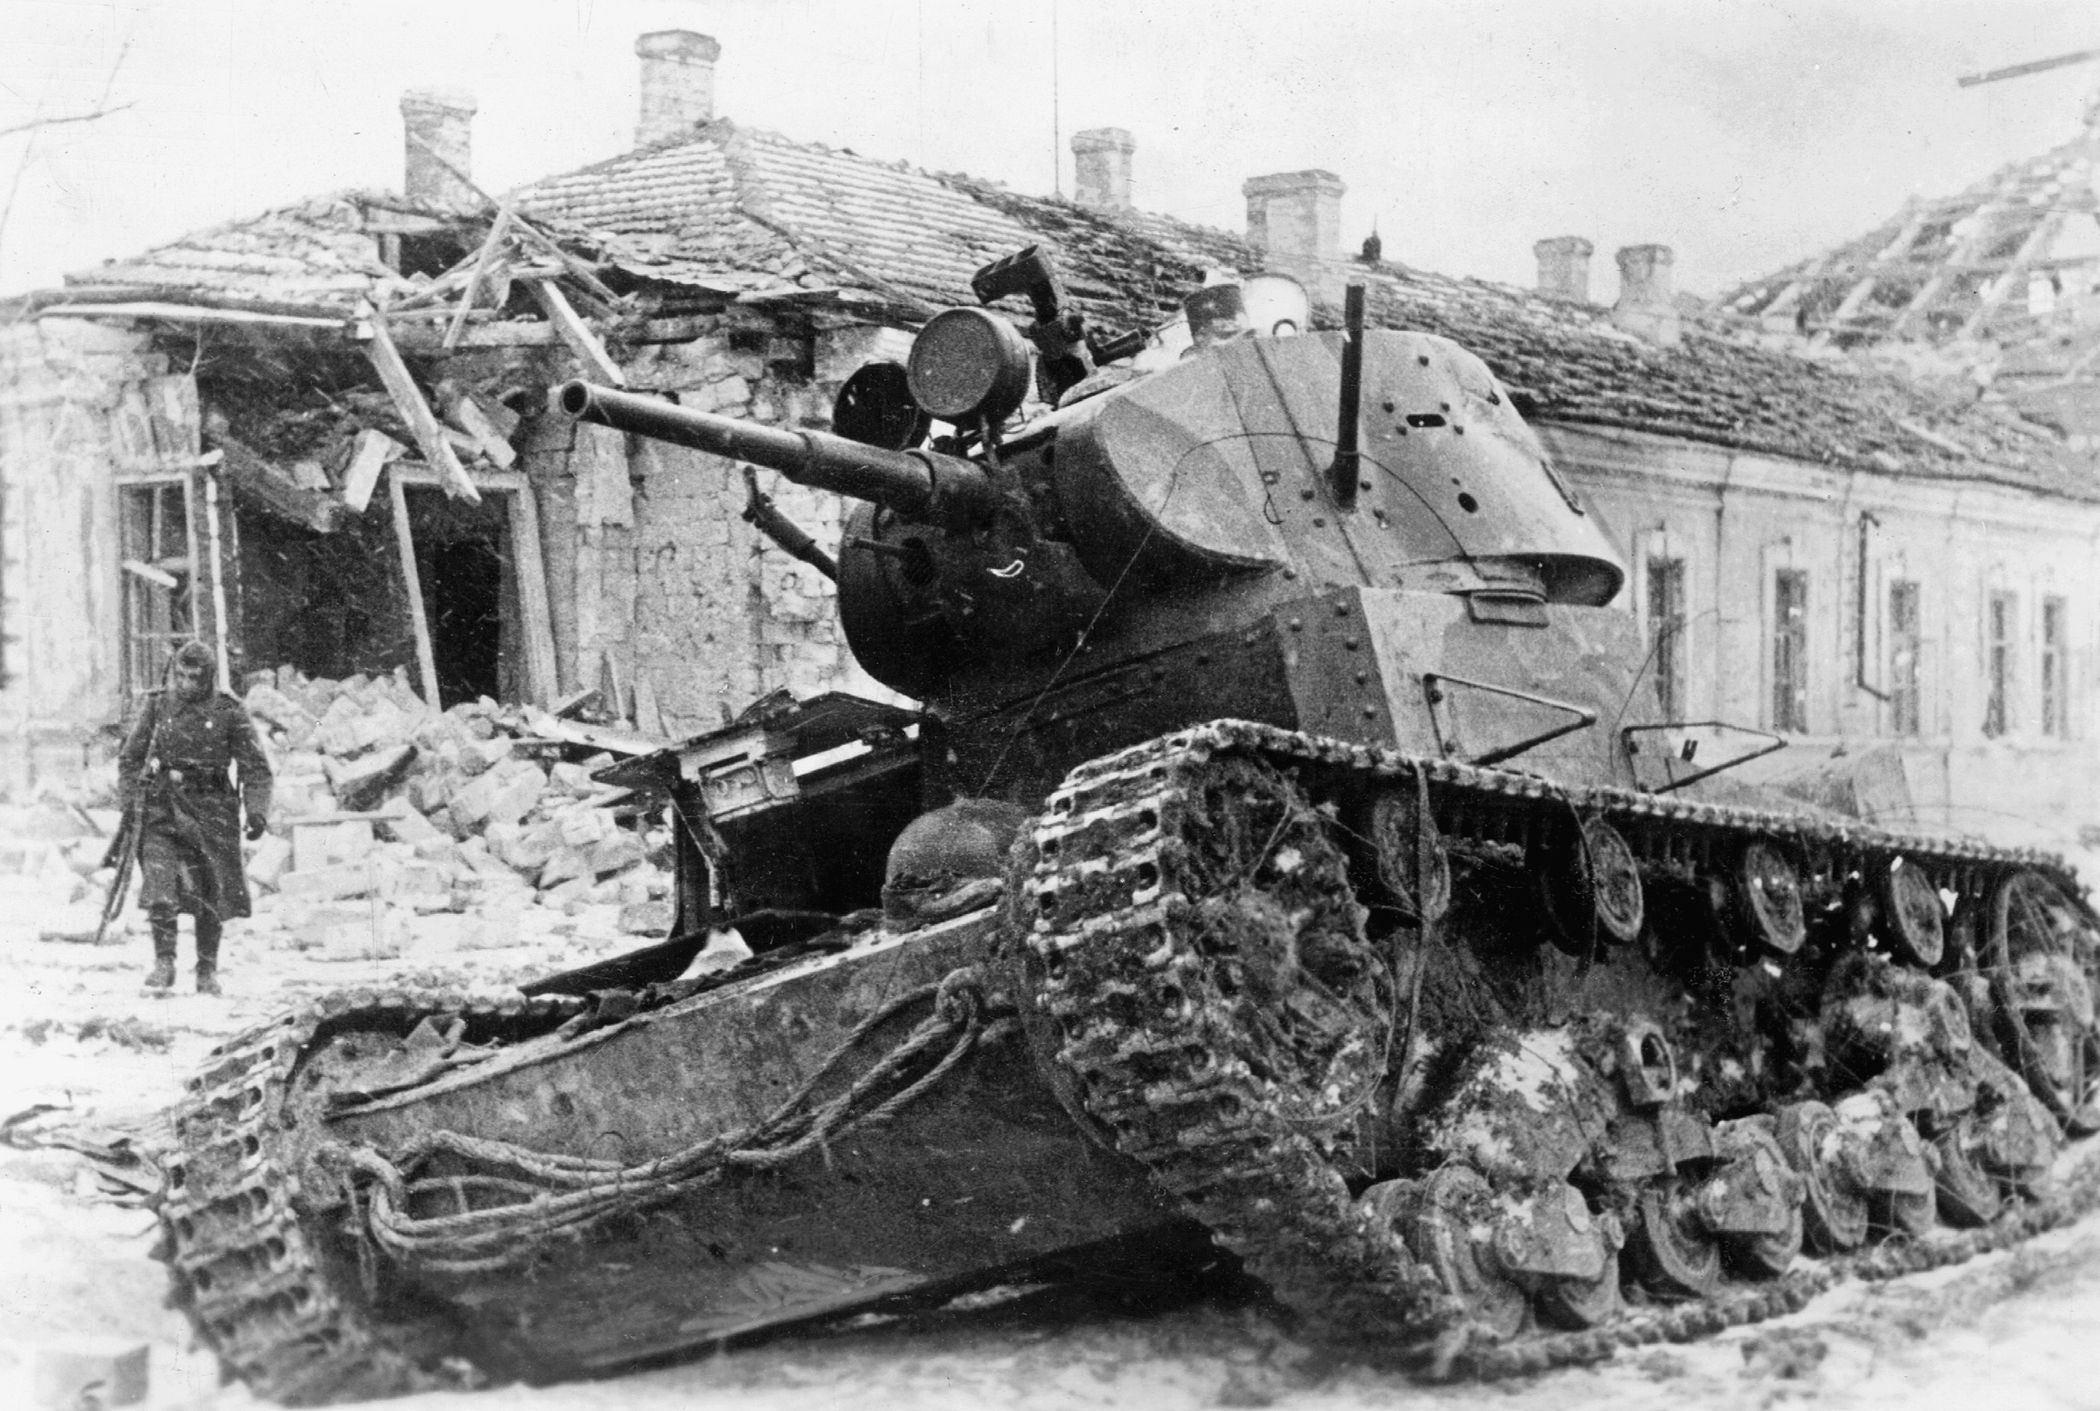 The charred hulk of a Soviet tank sits derelict following a clash with German armored units during a winter battle in 1942. Although Soviet forces were committed to the Luban offensive in large numbers, the resourceful Germans repelled them with great loss.